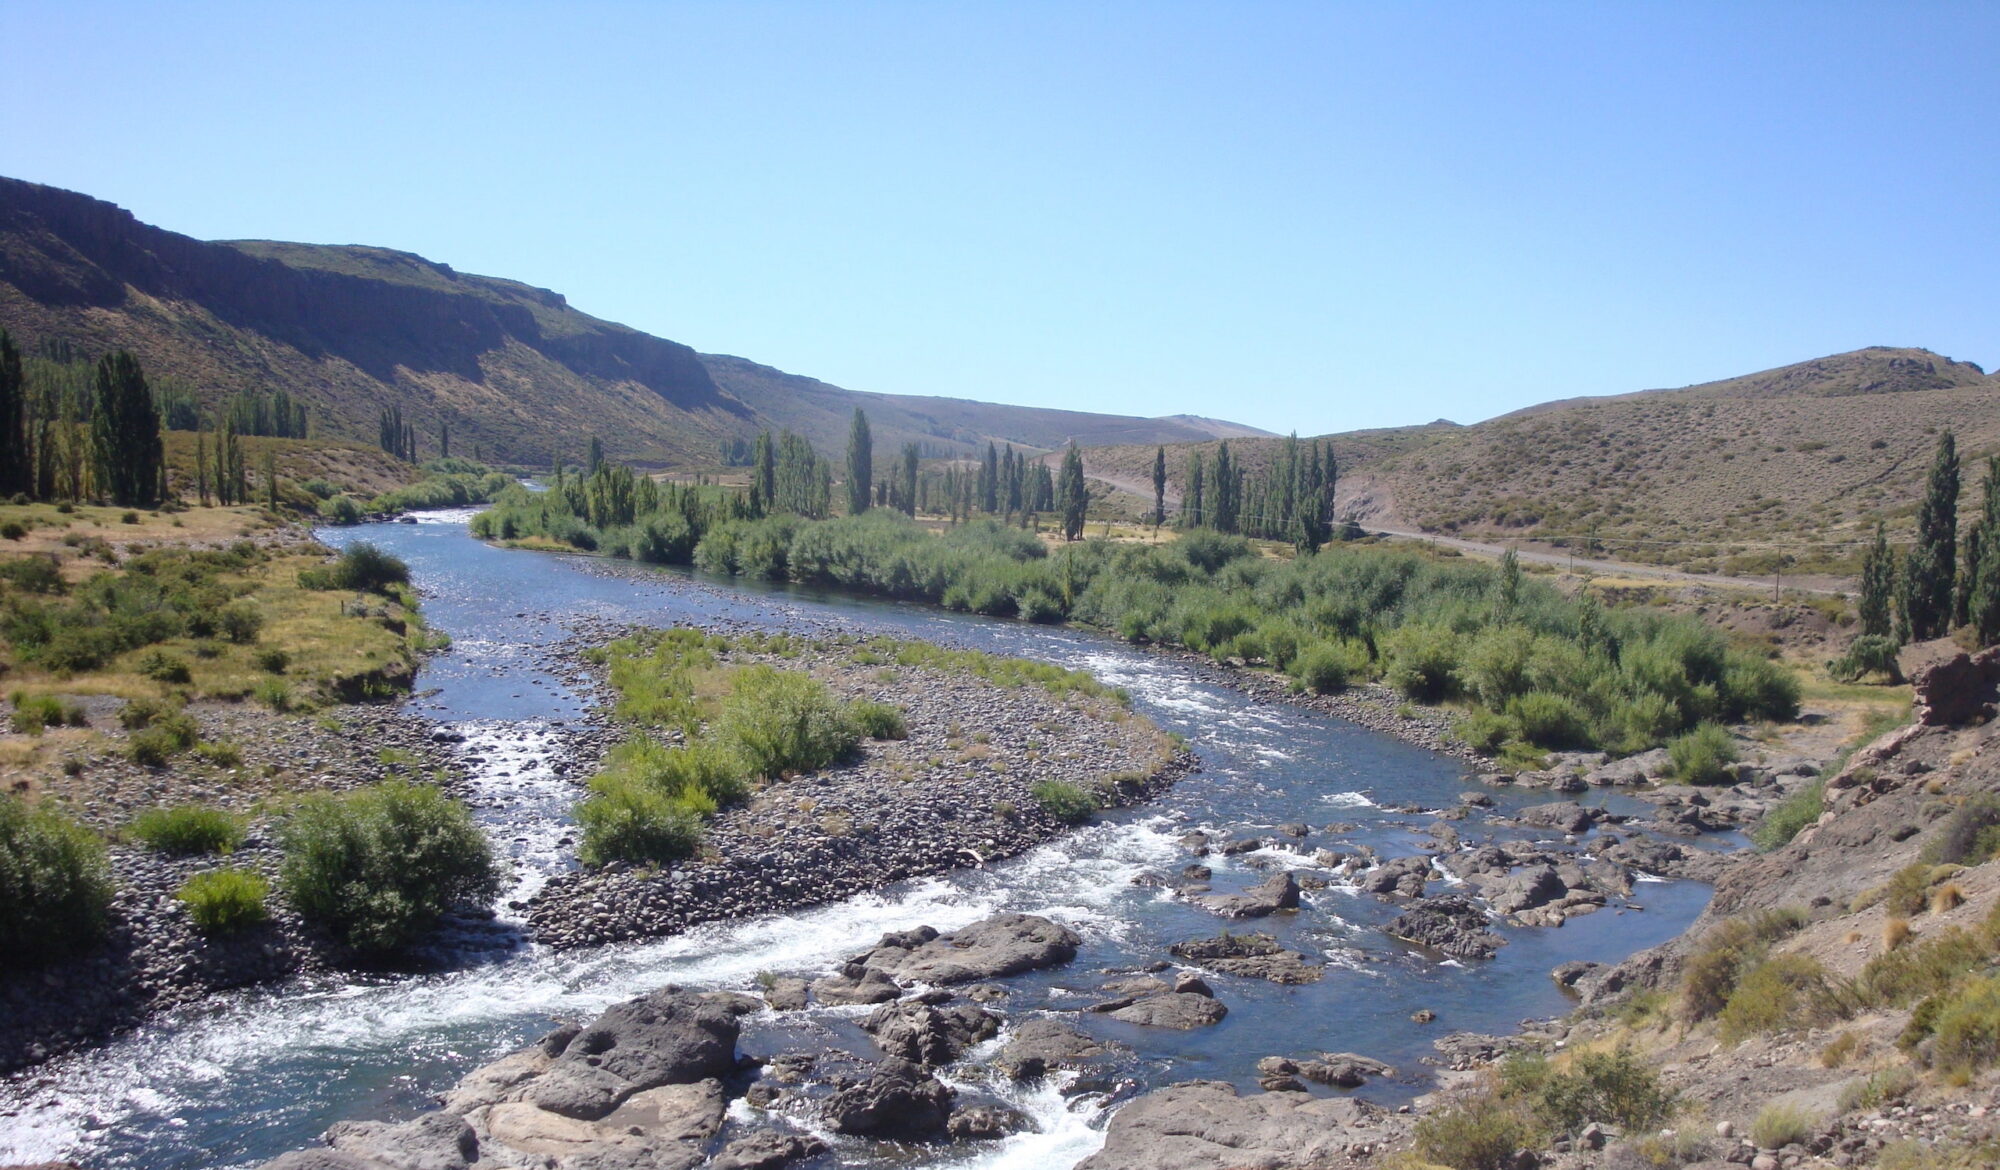 <p>The Nahueve river in Neuquén province, Argentina. Local groups have raised concerns over the possible environmental impacts of a new dam on the river (Image: <a href="https://www.flickr.com/photos/irenaimages/23517397858/in/photolist-Cai5T6-BQ9P3S-ry5cC2-suTh3i-sxi2AC-sPSvVn-sdhGLW-sPSr42-sxpnpH-BAMkvD">Neuquén Development and Investment Agency</a> / <a href="https://www.flickr.com/people/irenaimages/">IRENA</a>, <a href="https://creativecommons.org/licenses/by-nc-nd/2.0/">CC BY NC ND</a>)</p>